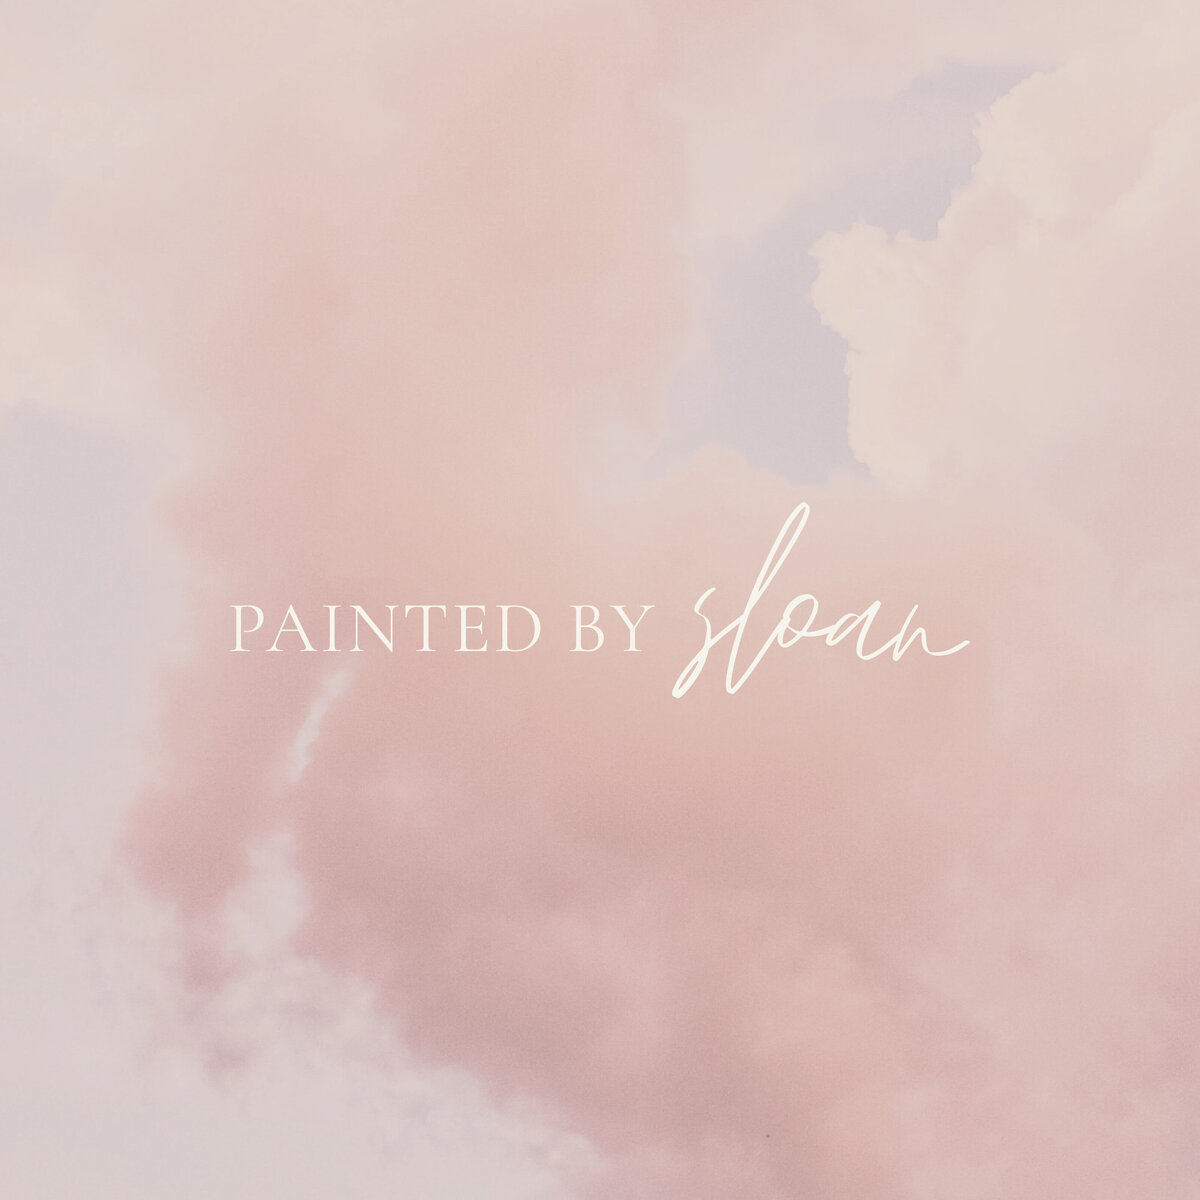 Painted by Sloan logo on pink clouds